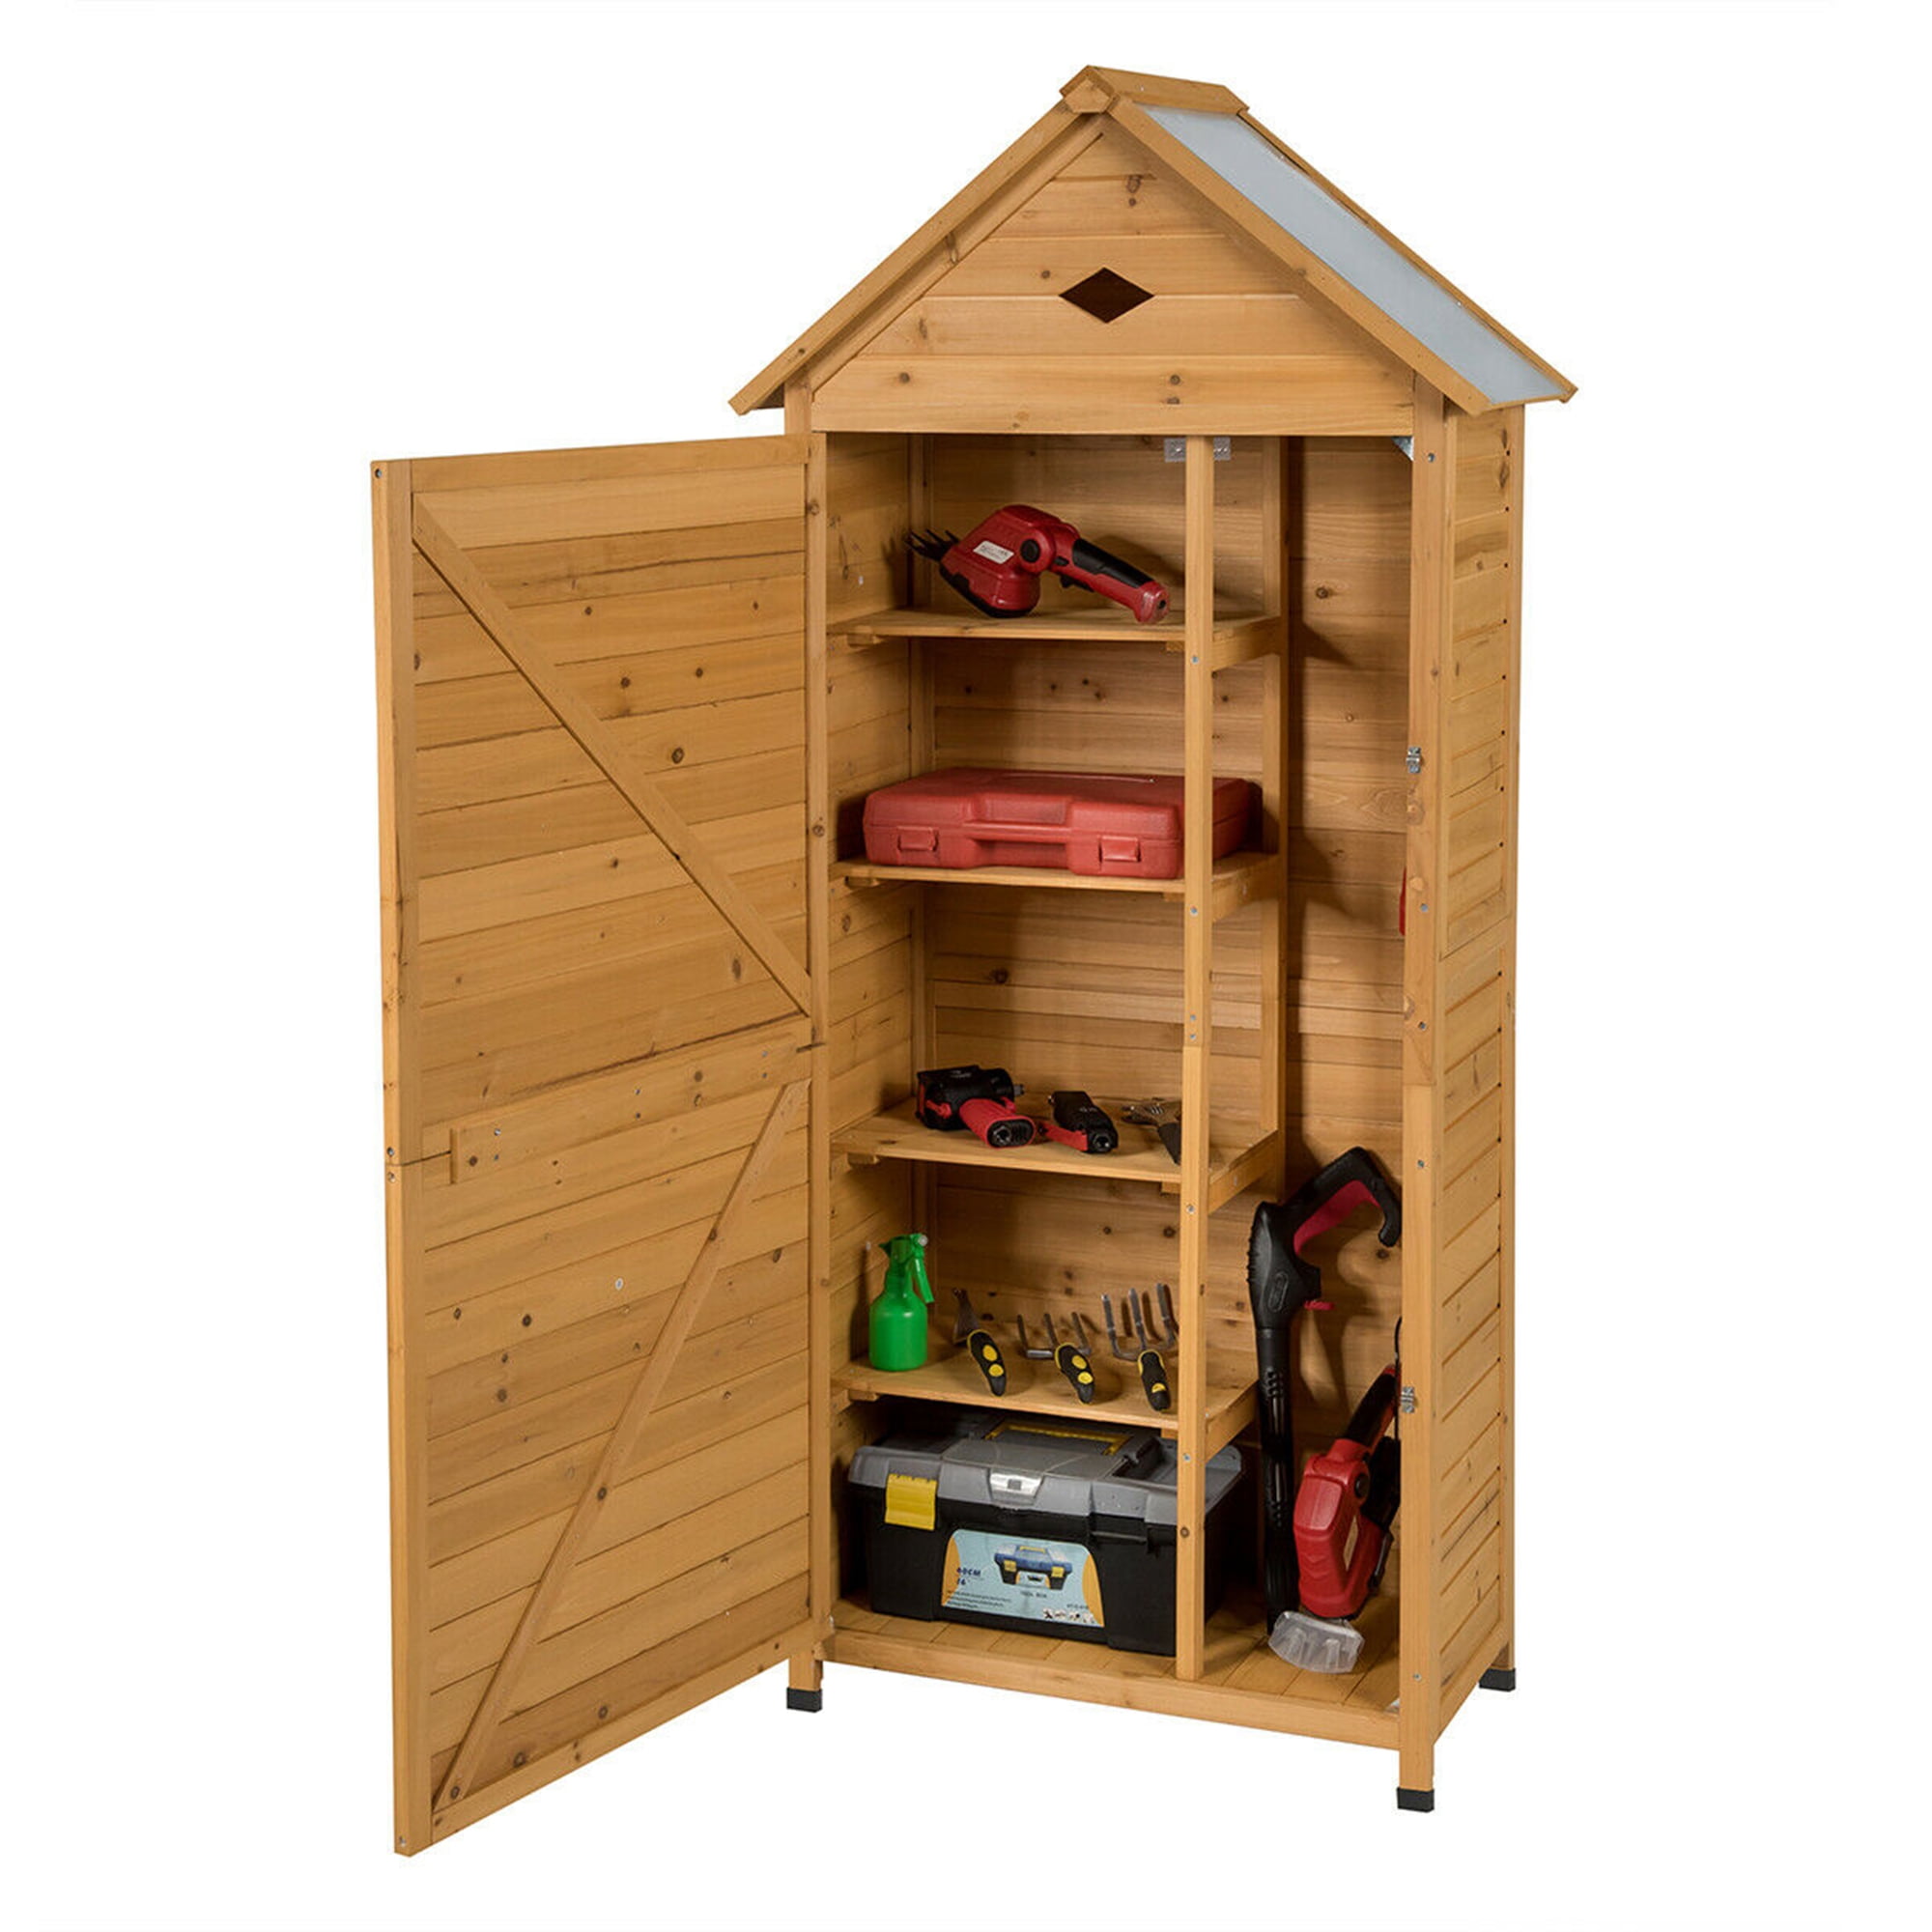 Gymax Outdoor Storage Shed Lockable, Outdoor Storage Cupboard With Shelves